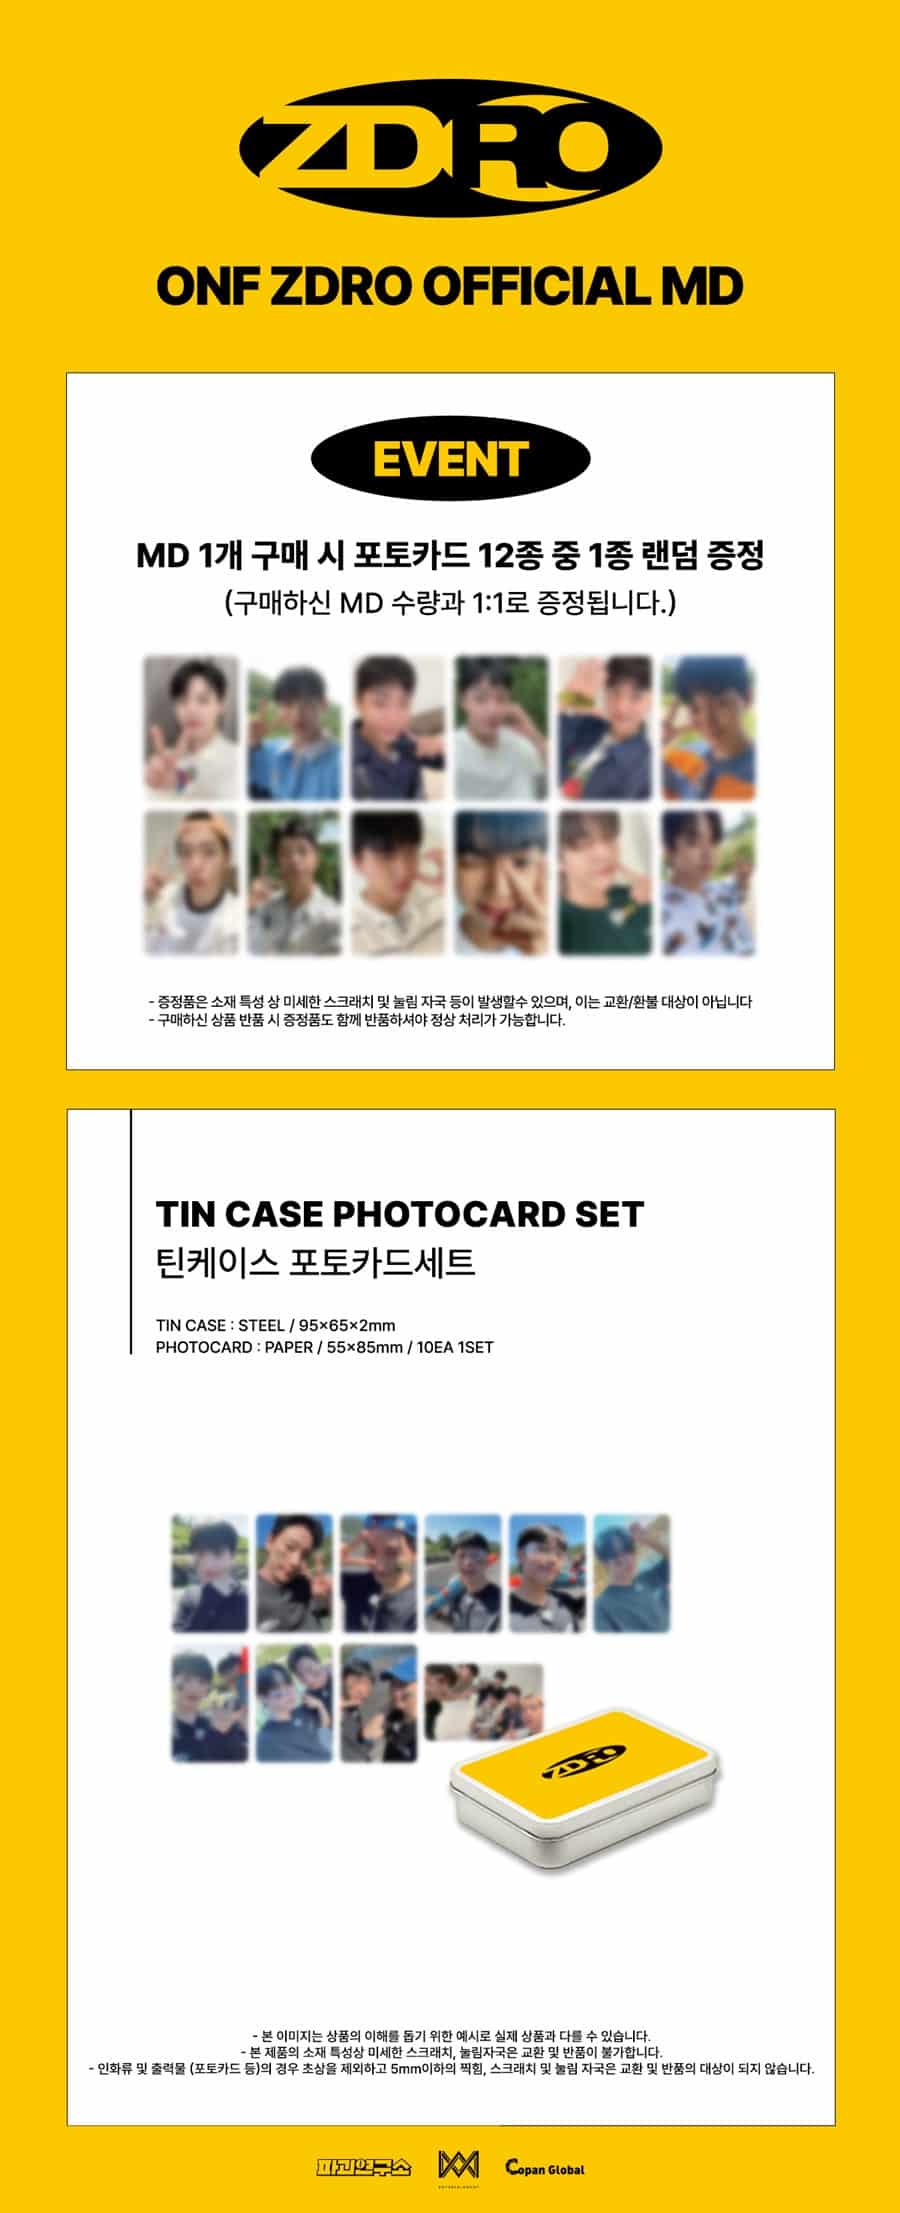 onf-01-tin-case-photocard-set-zdro-md-wholesales